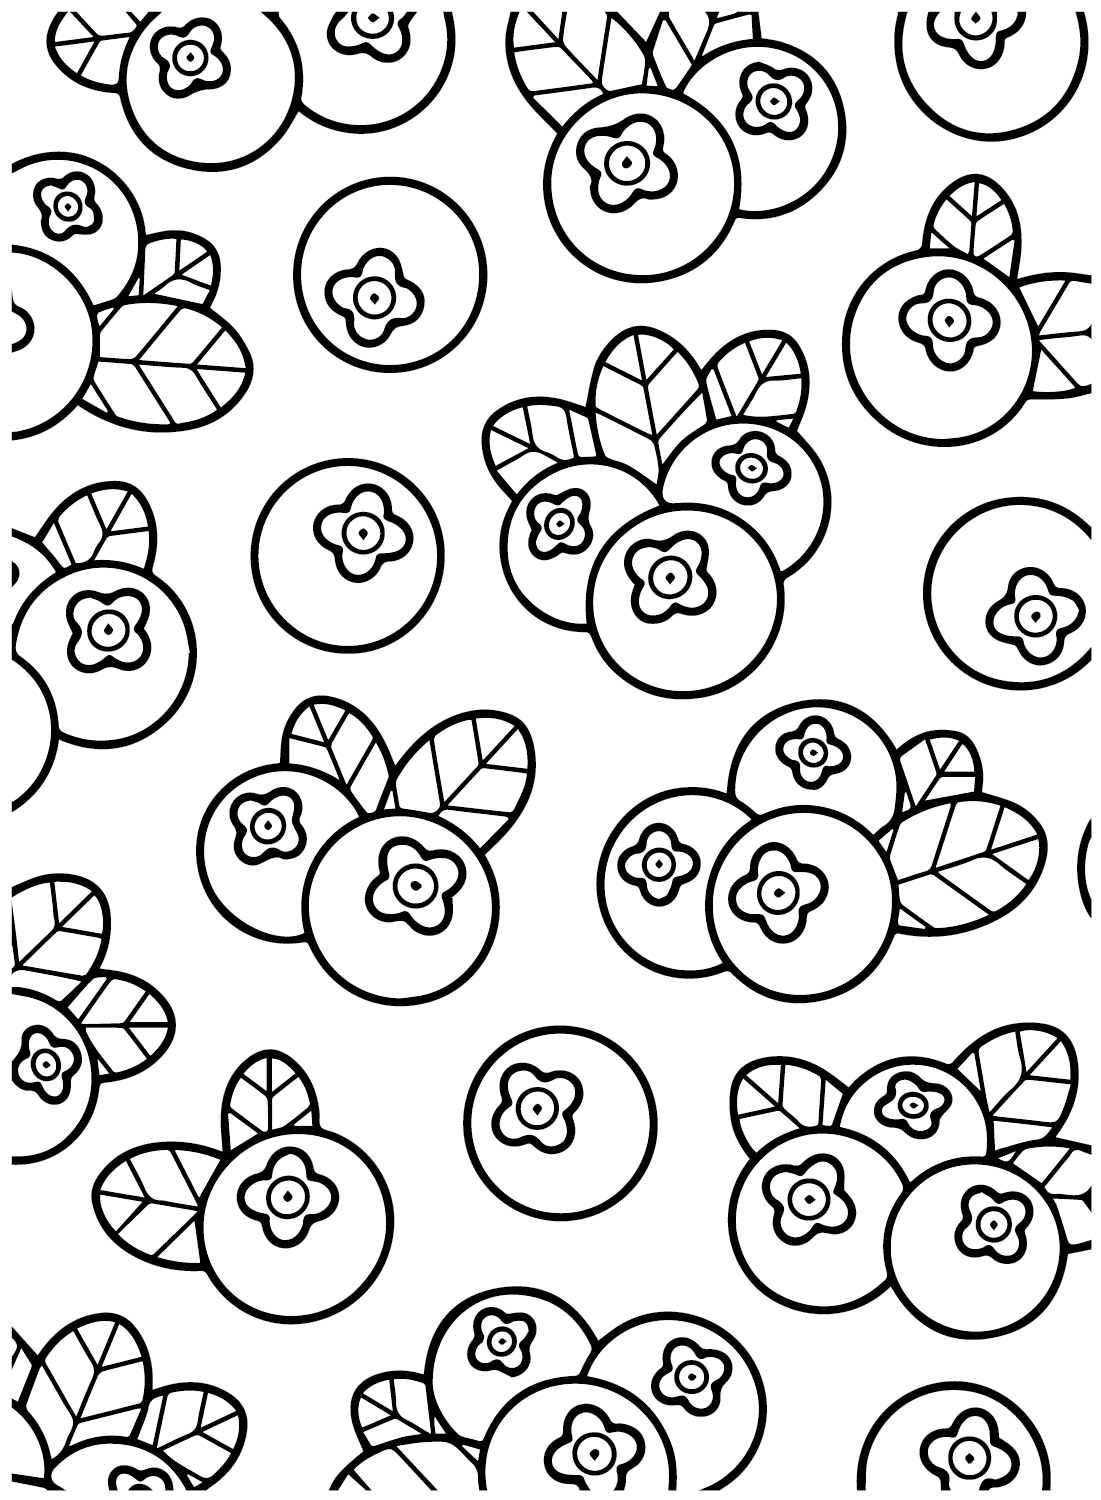 Cranberry Pattern Coloring Page